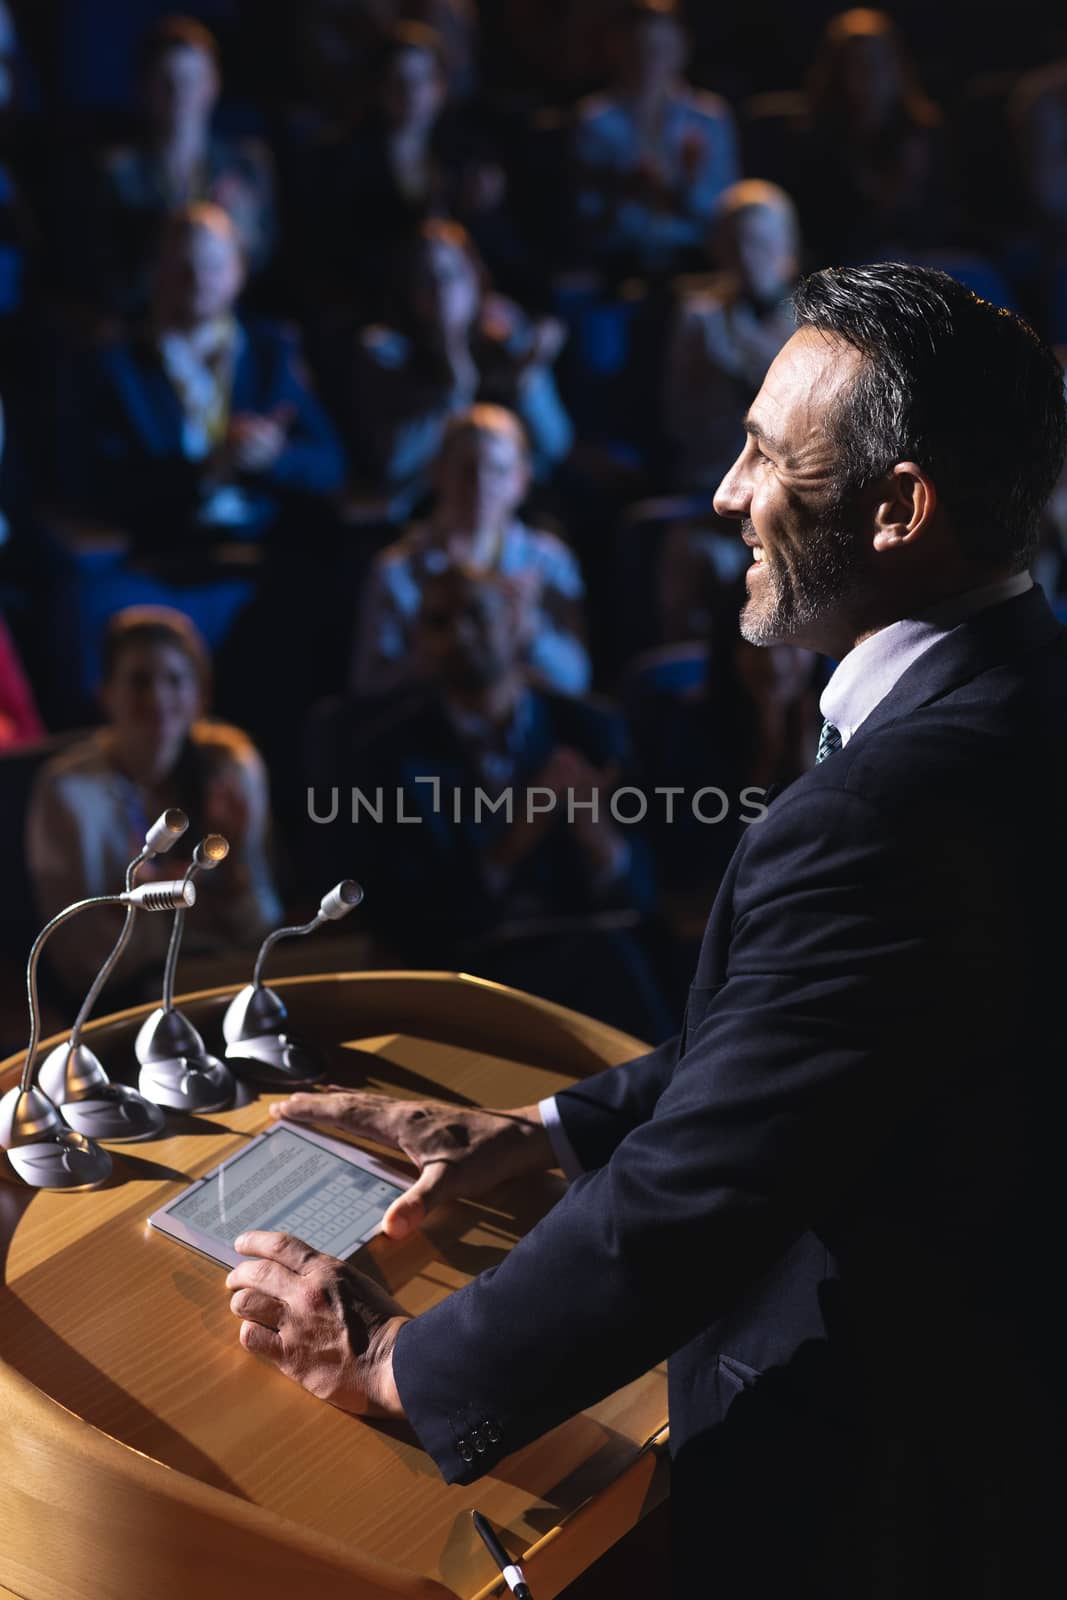 Businessman standing and giving presentation in the auditorium  by Wavebreakmedia